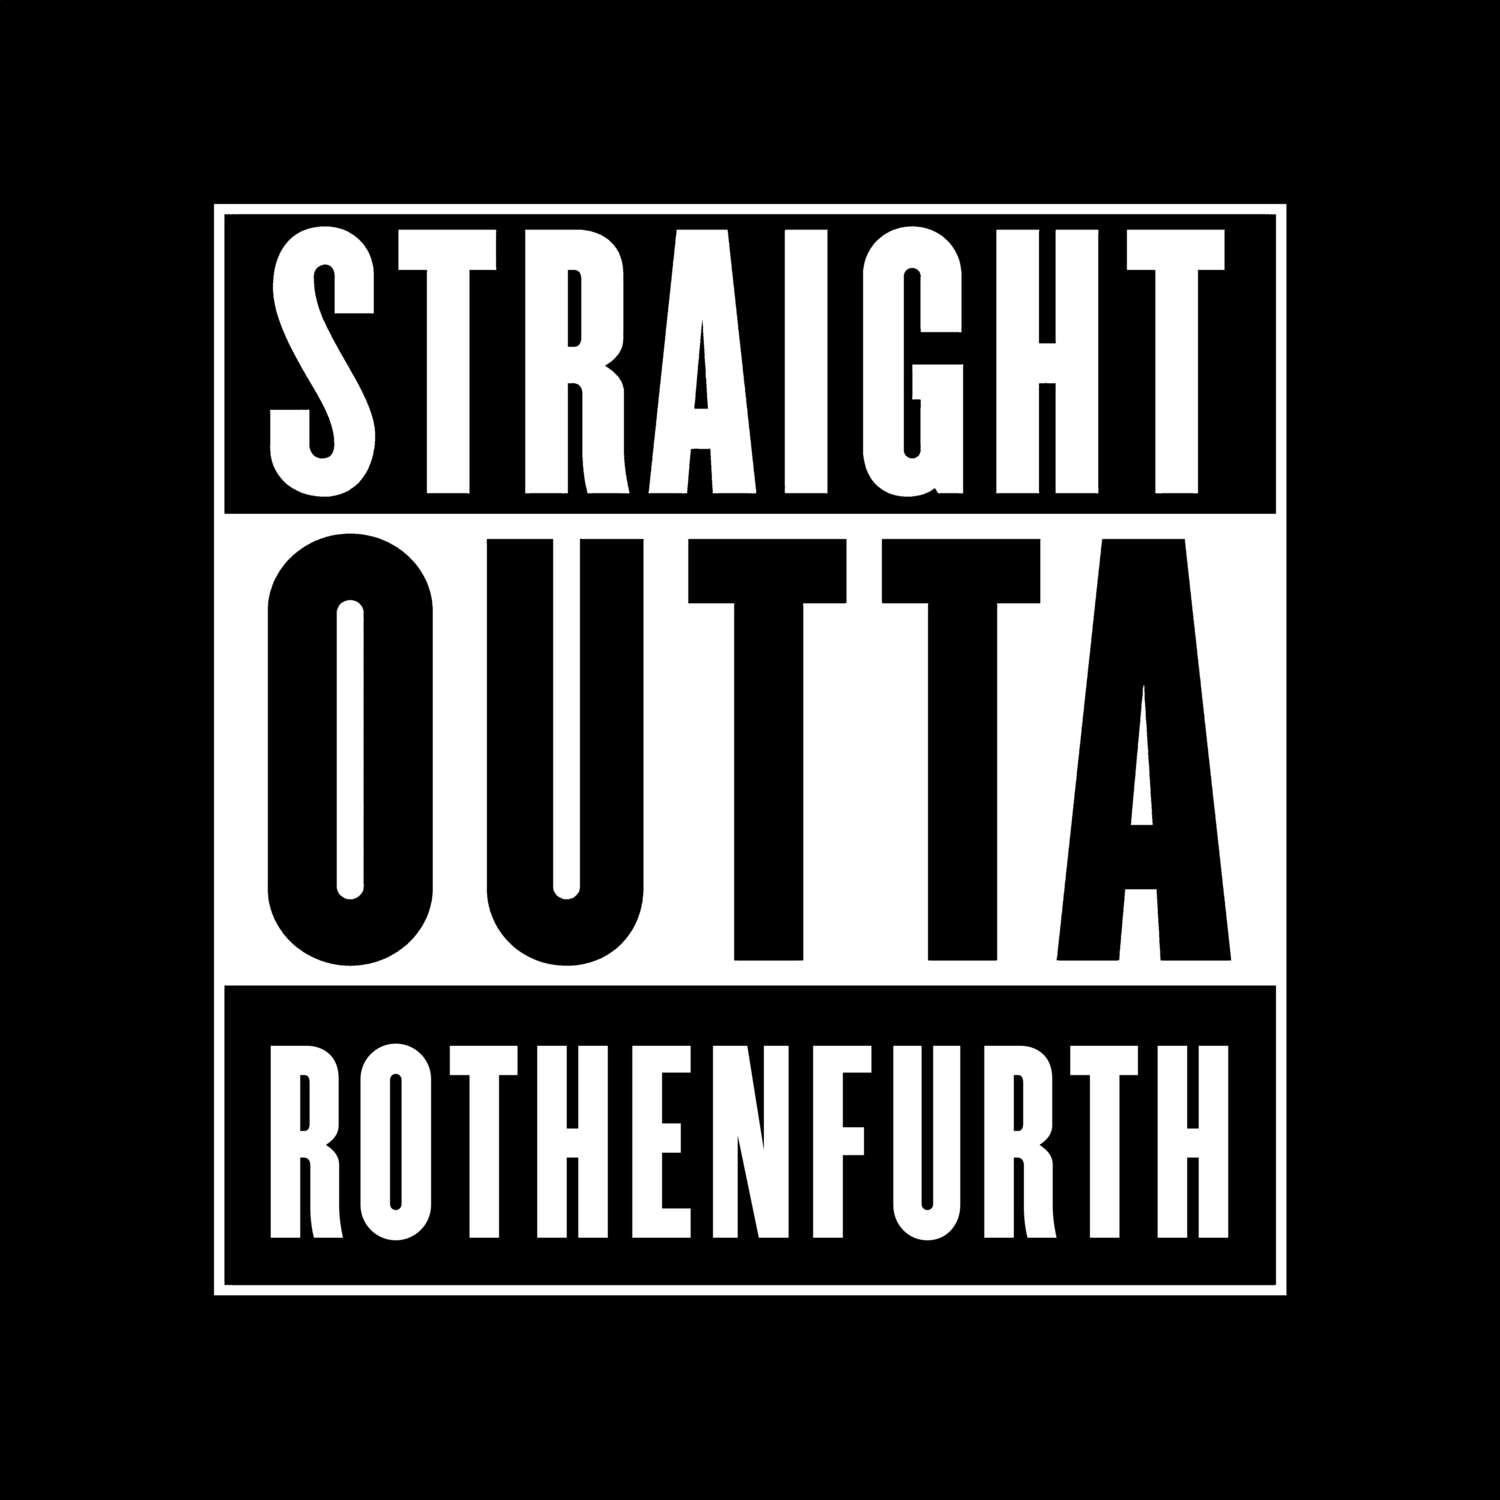 Rothenfurth T-Shirt »Straight Outta«